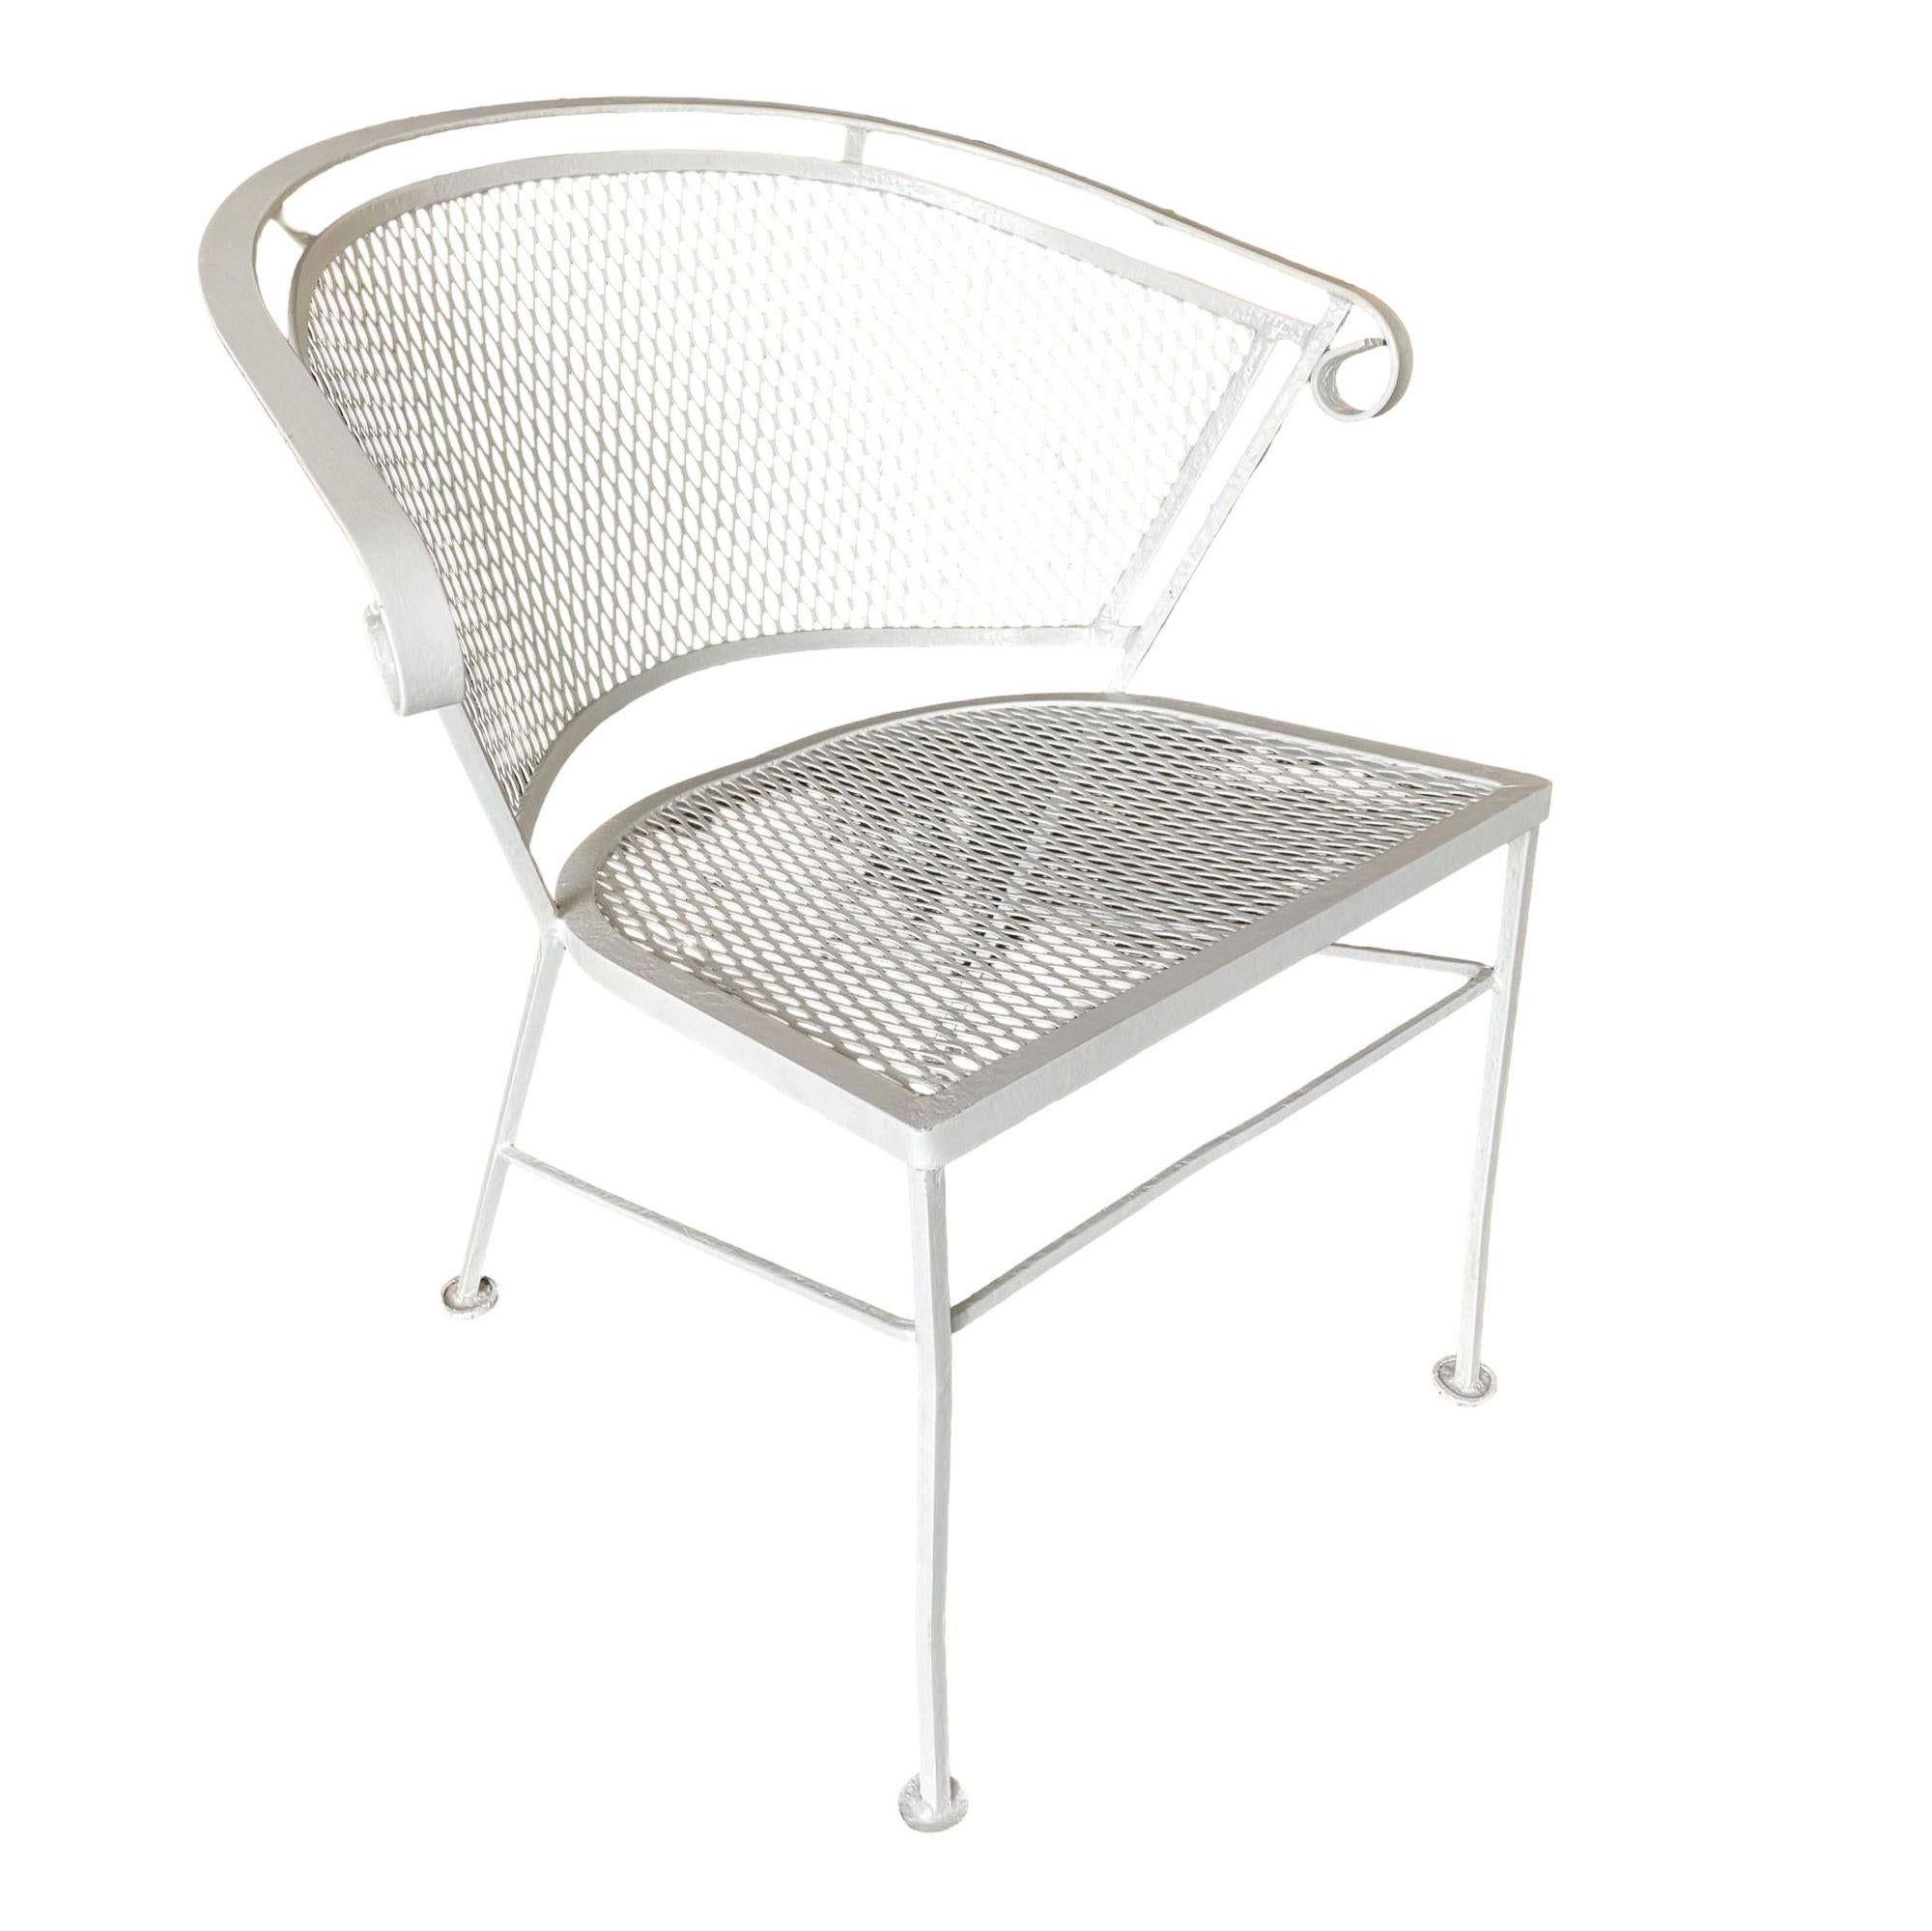 A Pair of Woodard Pinecrest rod iron outdoor/patio chairs with distinct curved modernist backrests. This chair is constructed with solid core iron rods and is finished in your choice of a pure white or black finish with padded seats.

Seat Height: